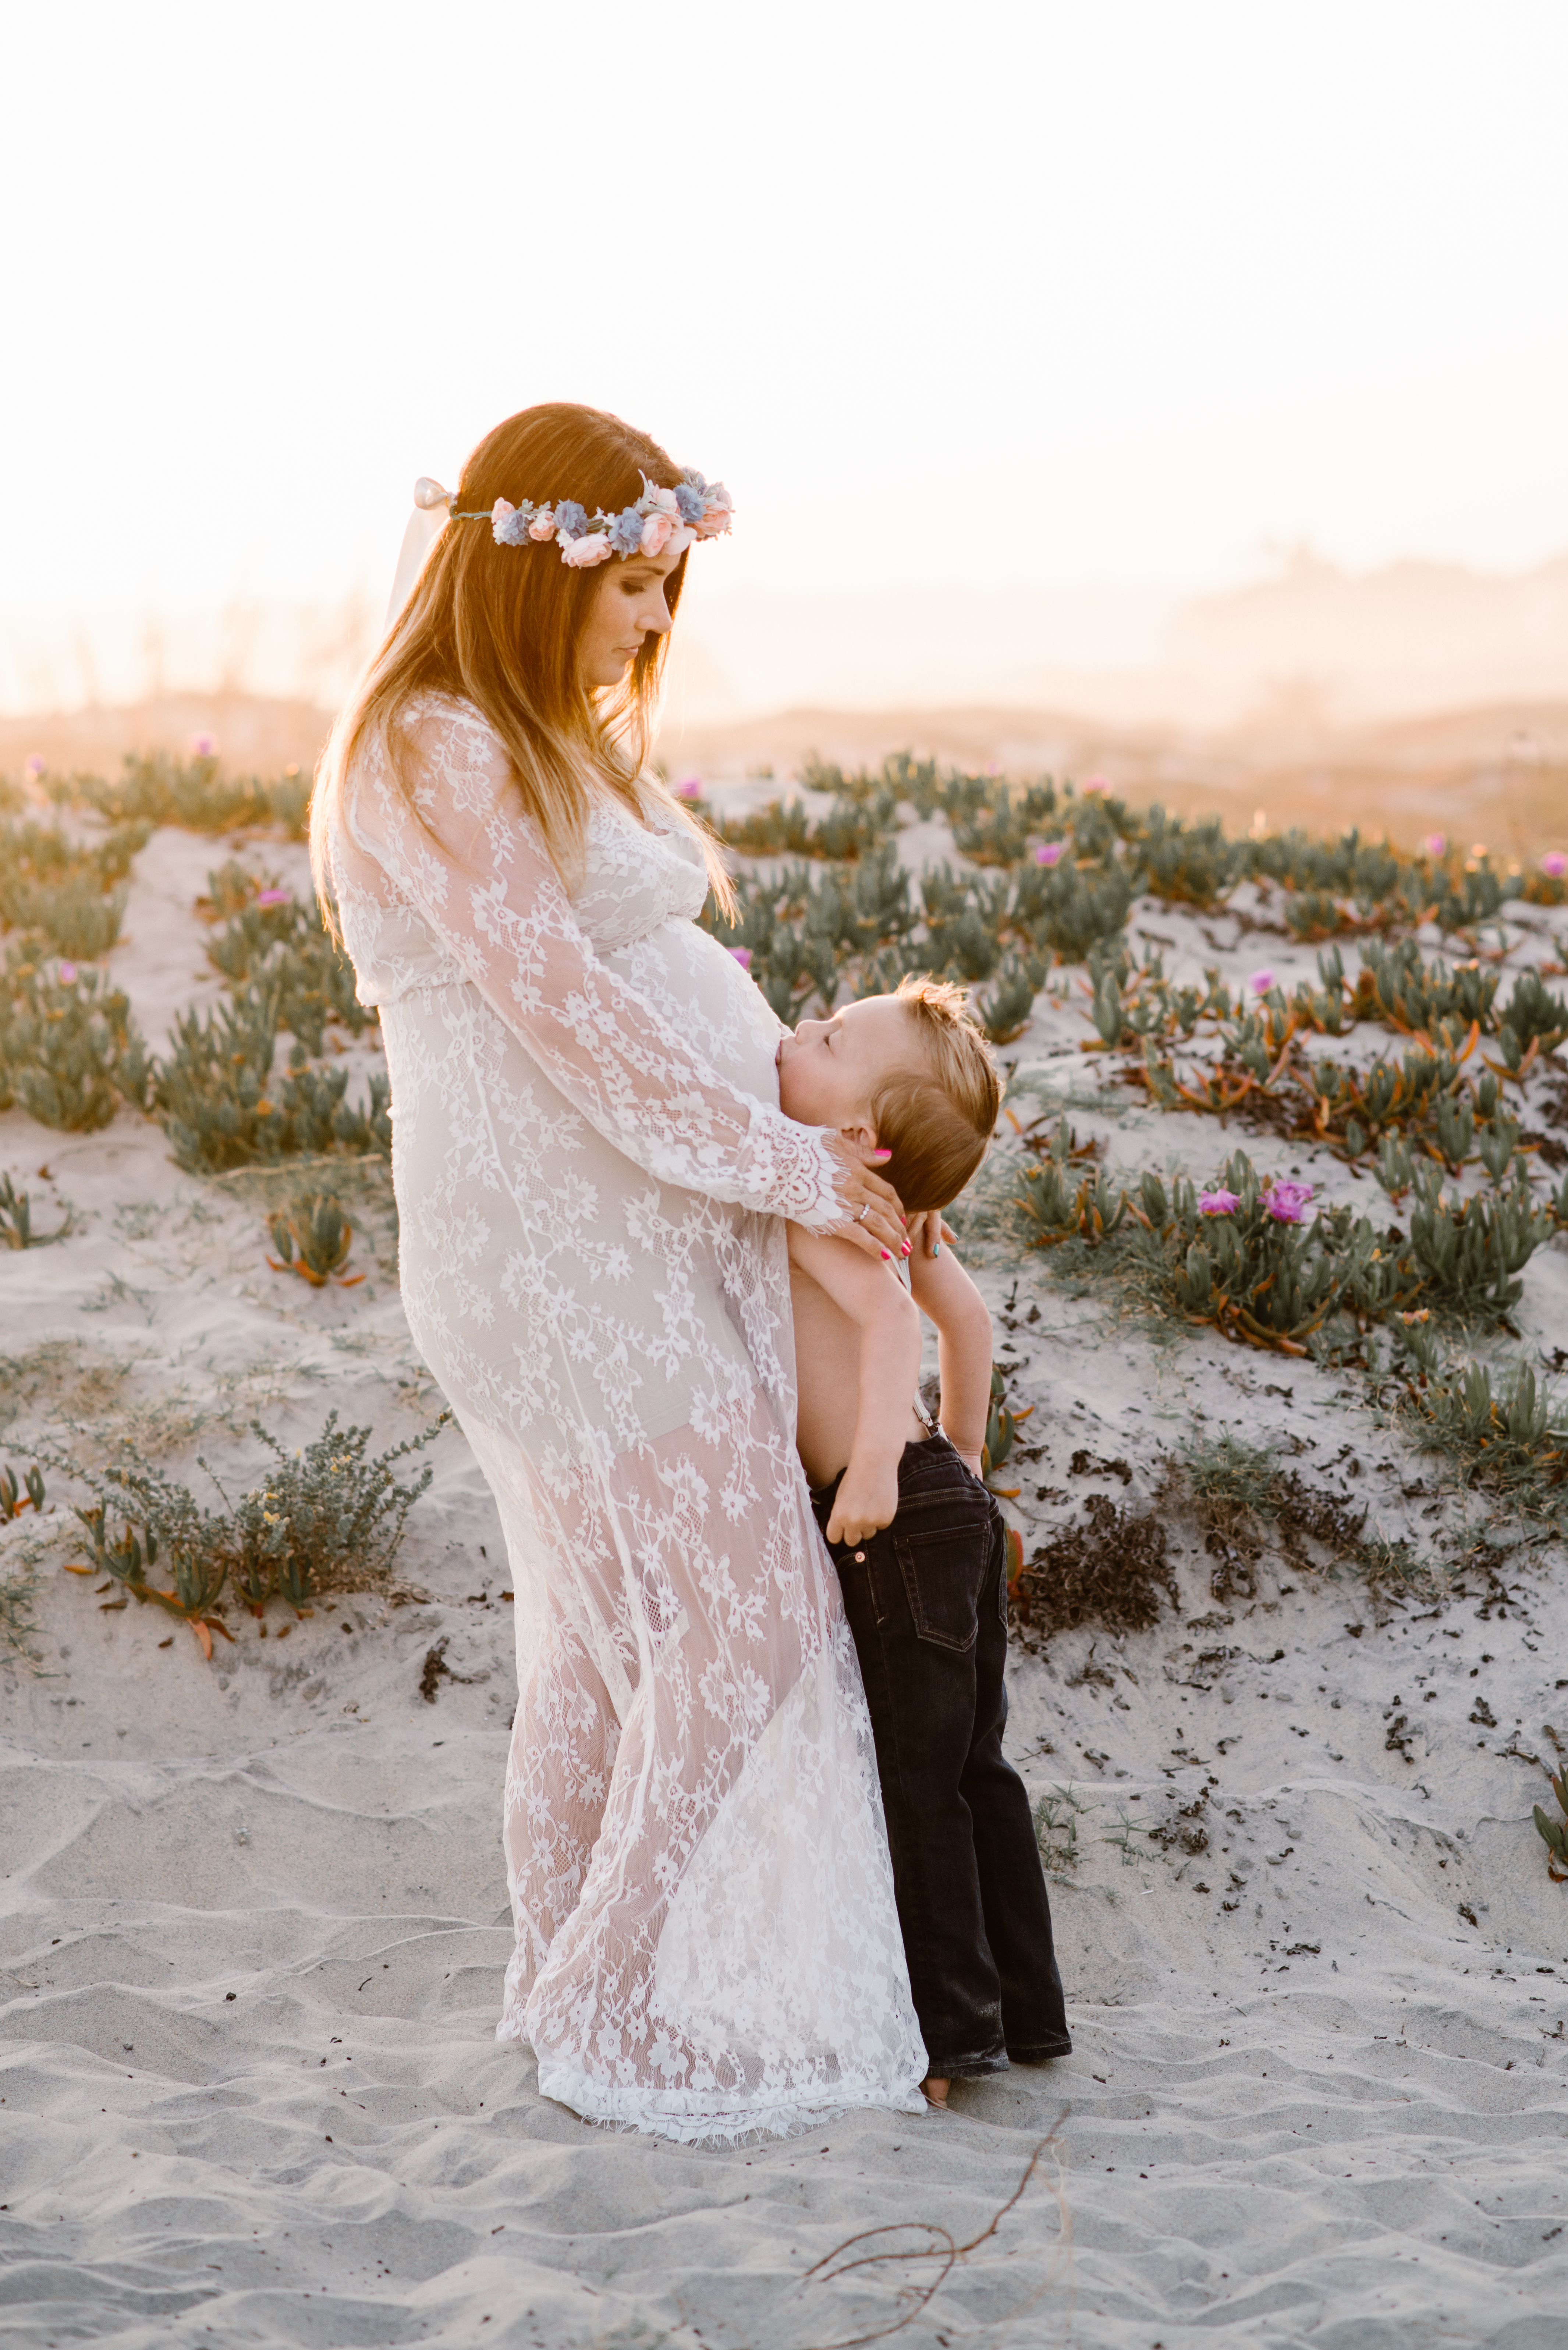 Son kissing bellyfamily session at Coronado Beach by Kylie Rae Photography